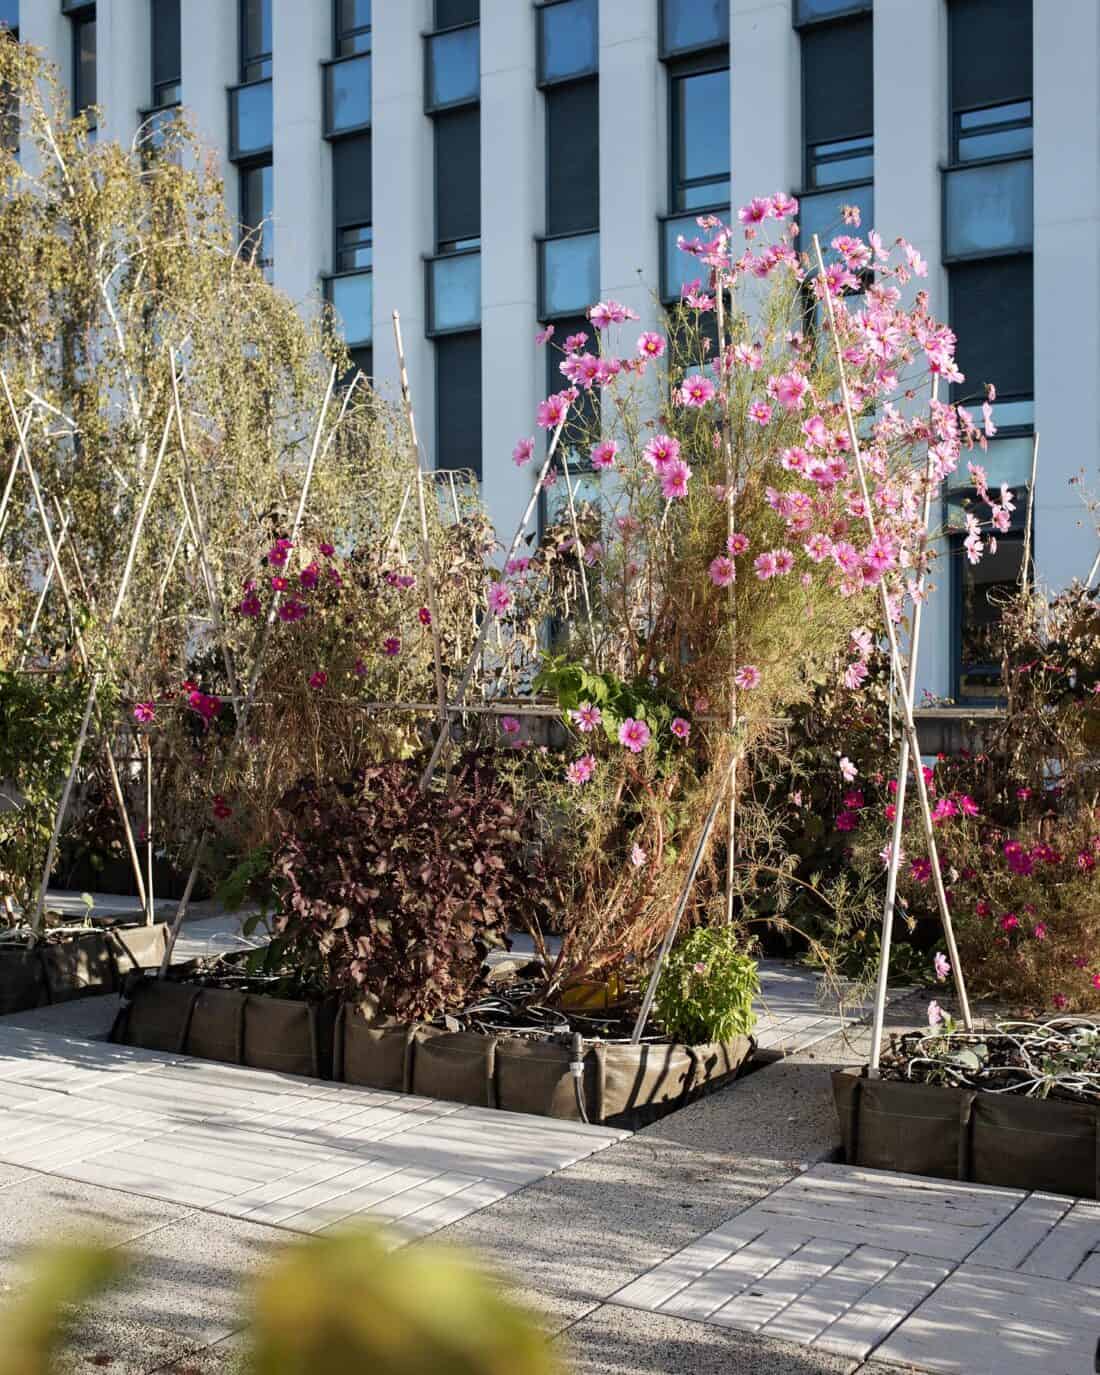 Urban garden with flowering pink cosmos and assorted plants in raised beds against a building facade.